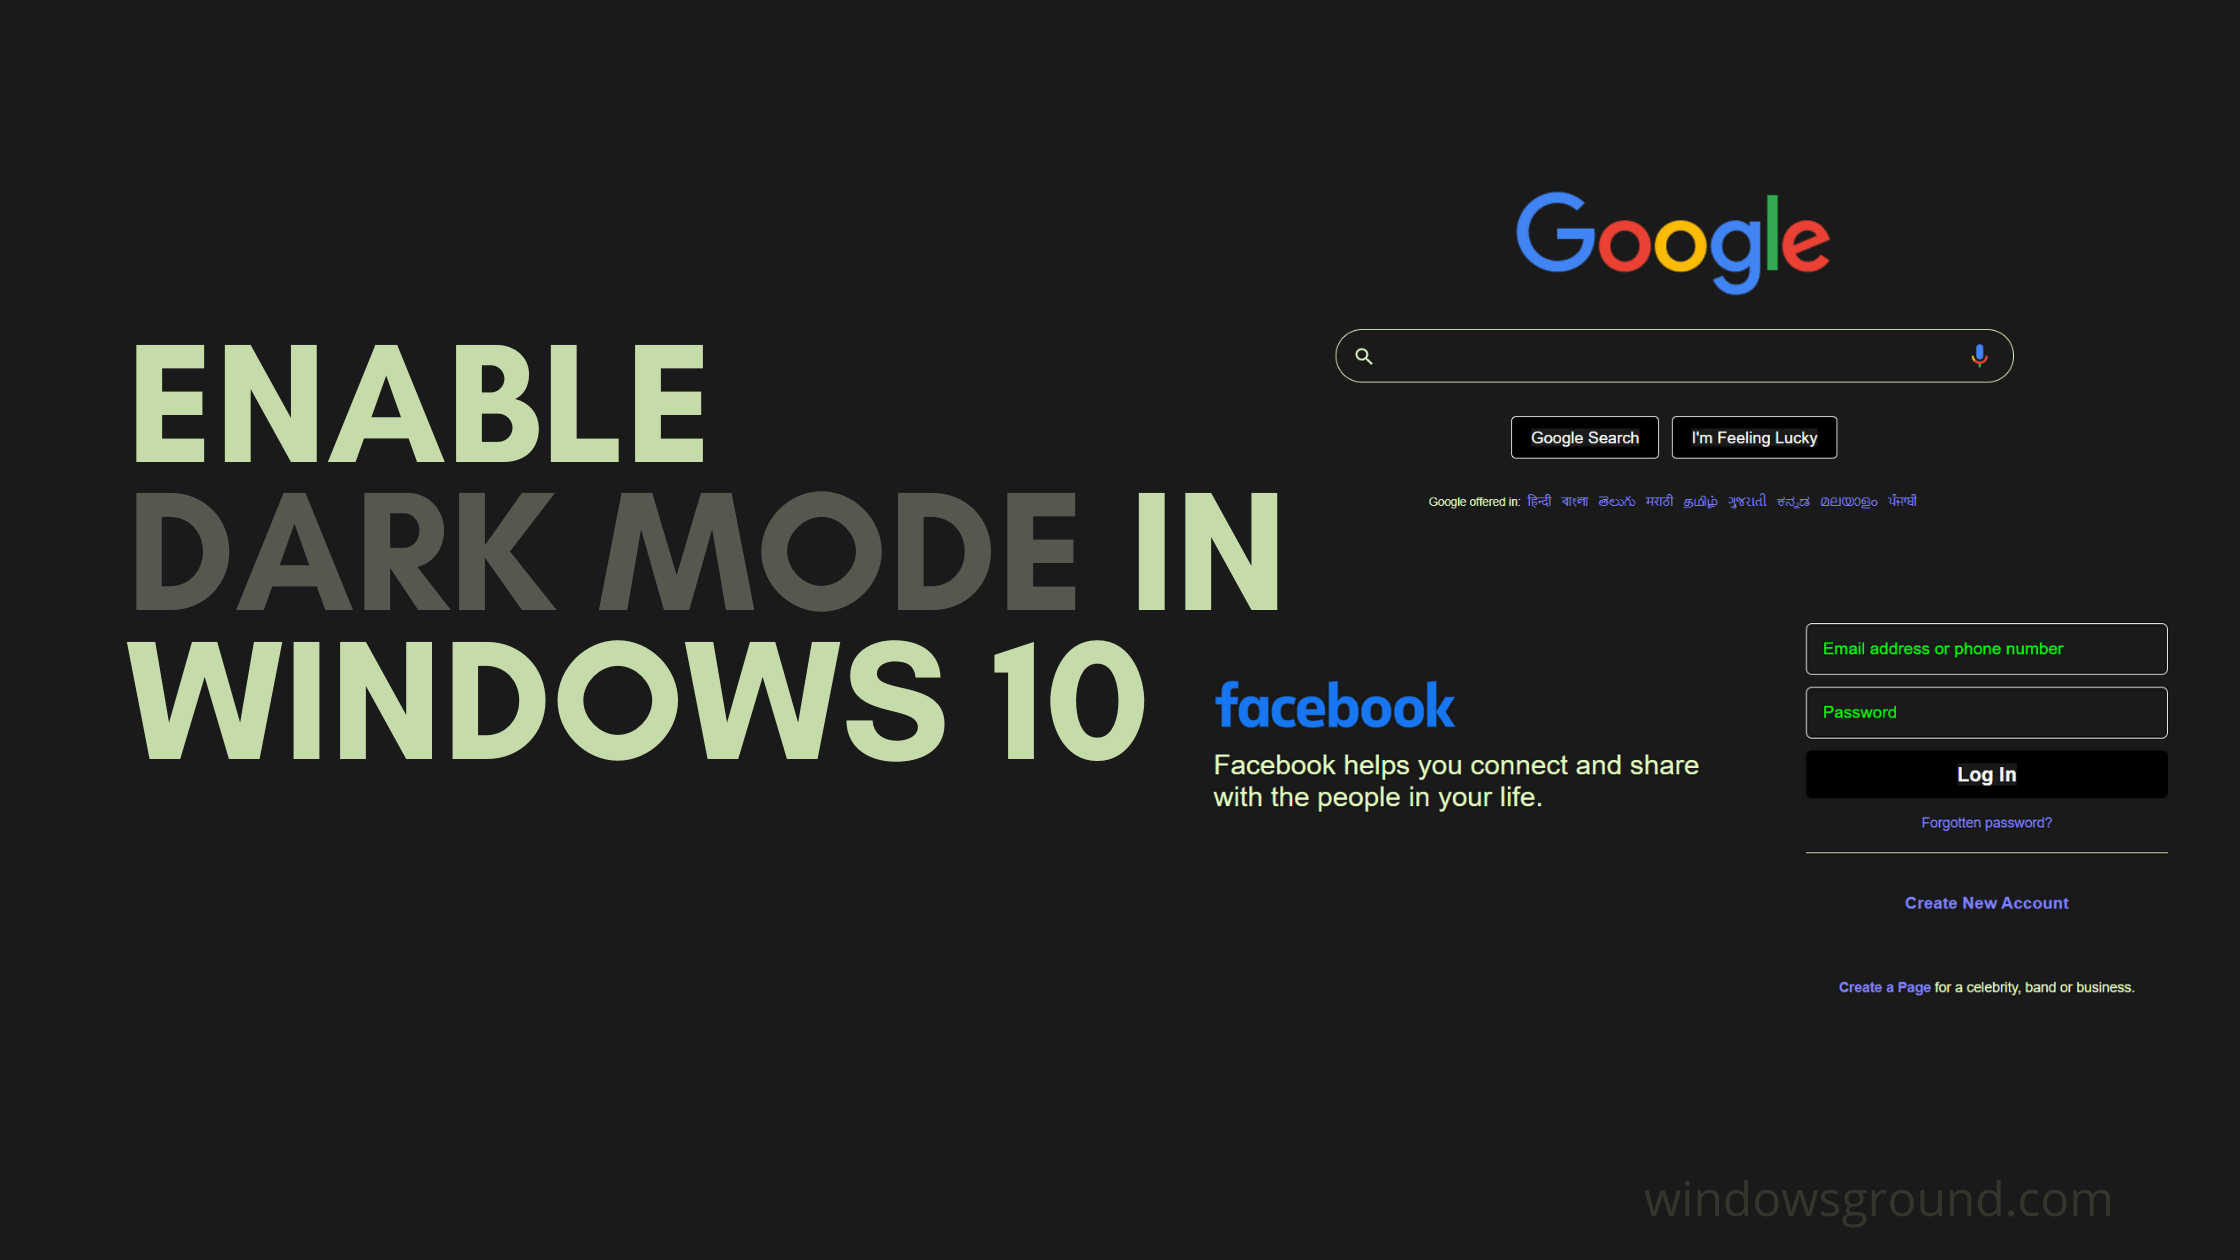 How to enable dark mode in Google Chrome, Facebook, etc in Windows 10 (no apps needed) free